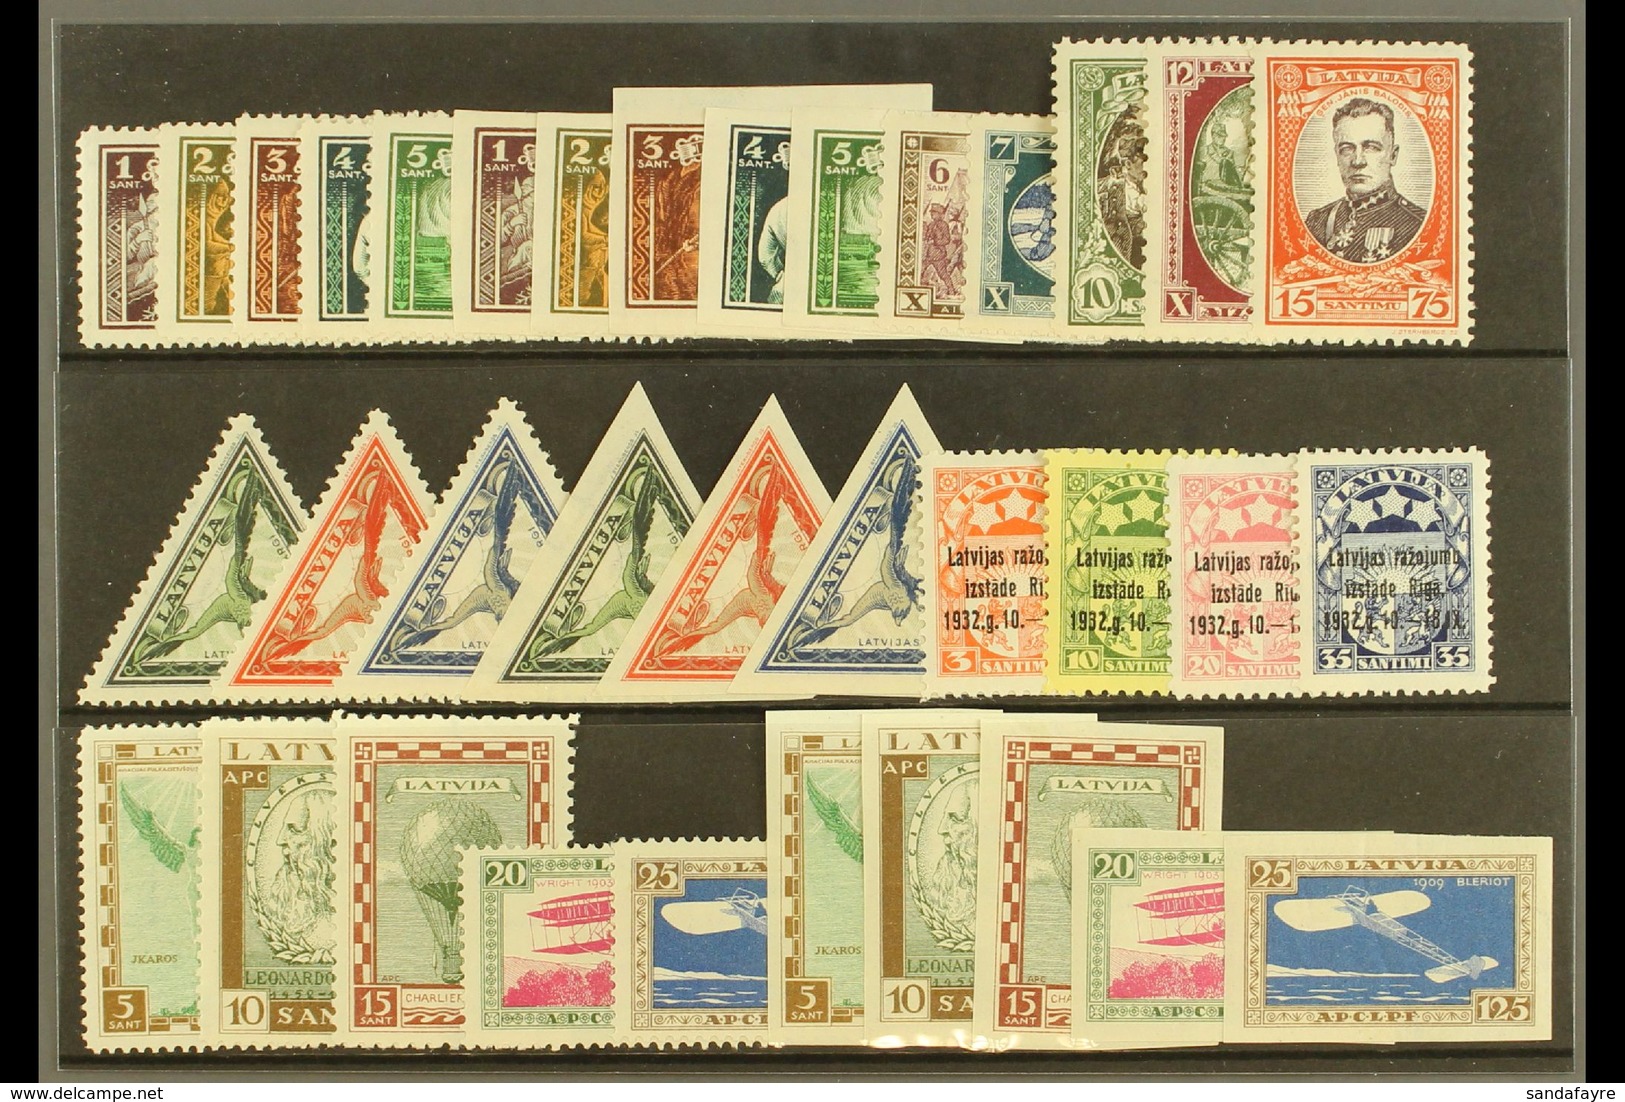 1932  A Fine Mint Collection Of Sets From This Year (Mi 193A/214A) Including Most Imperforate Set Variants. (35 Stamps)  - Lettland